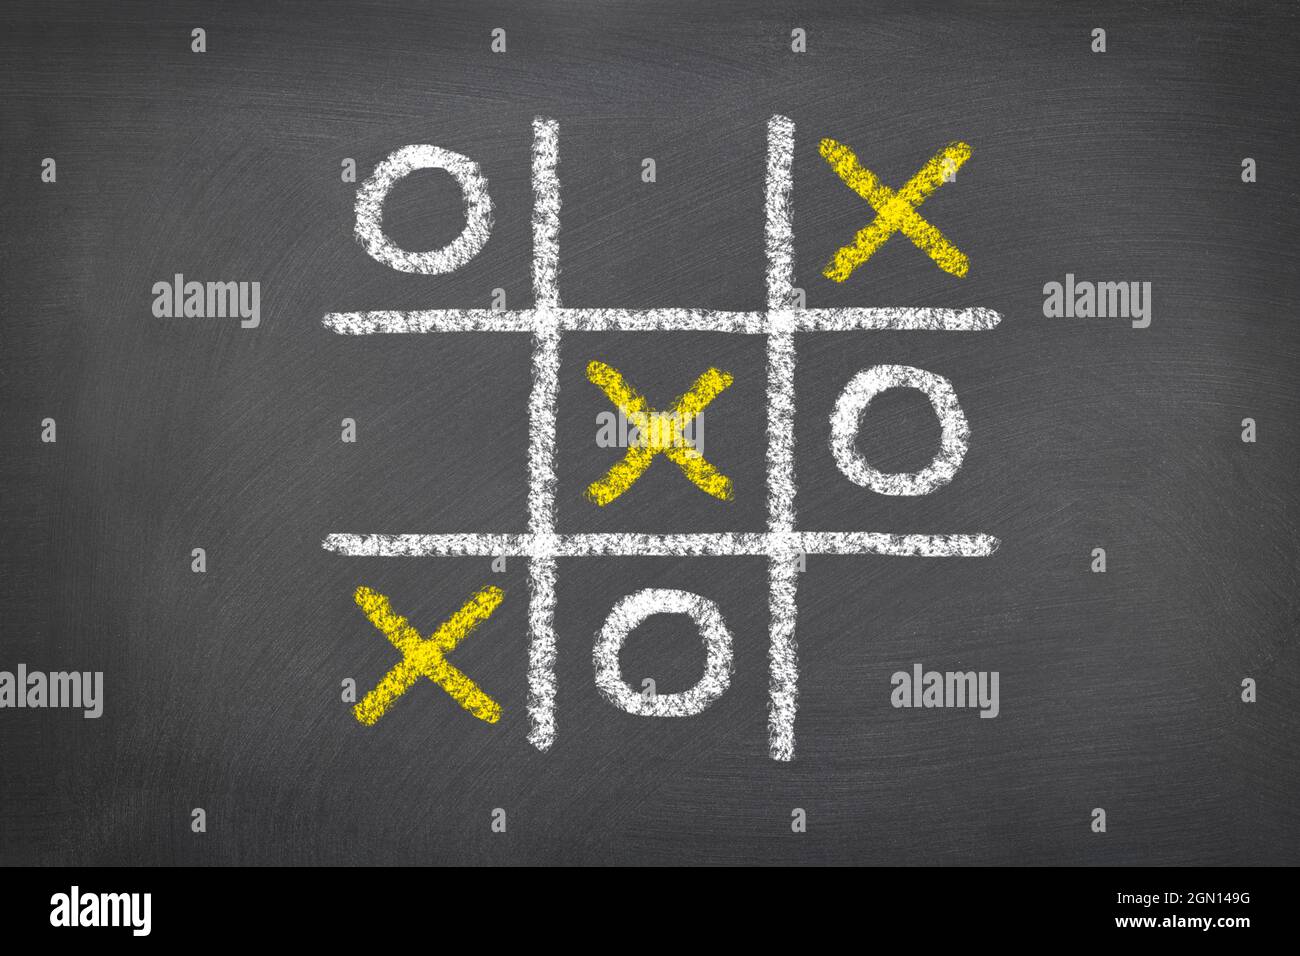 A game of tic tac toe played on a chalk board shows the need to be a critical thinker in the world of gaming. Stock Photo